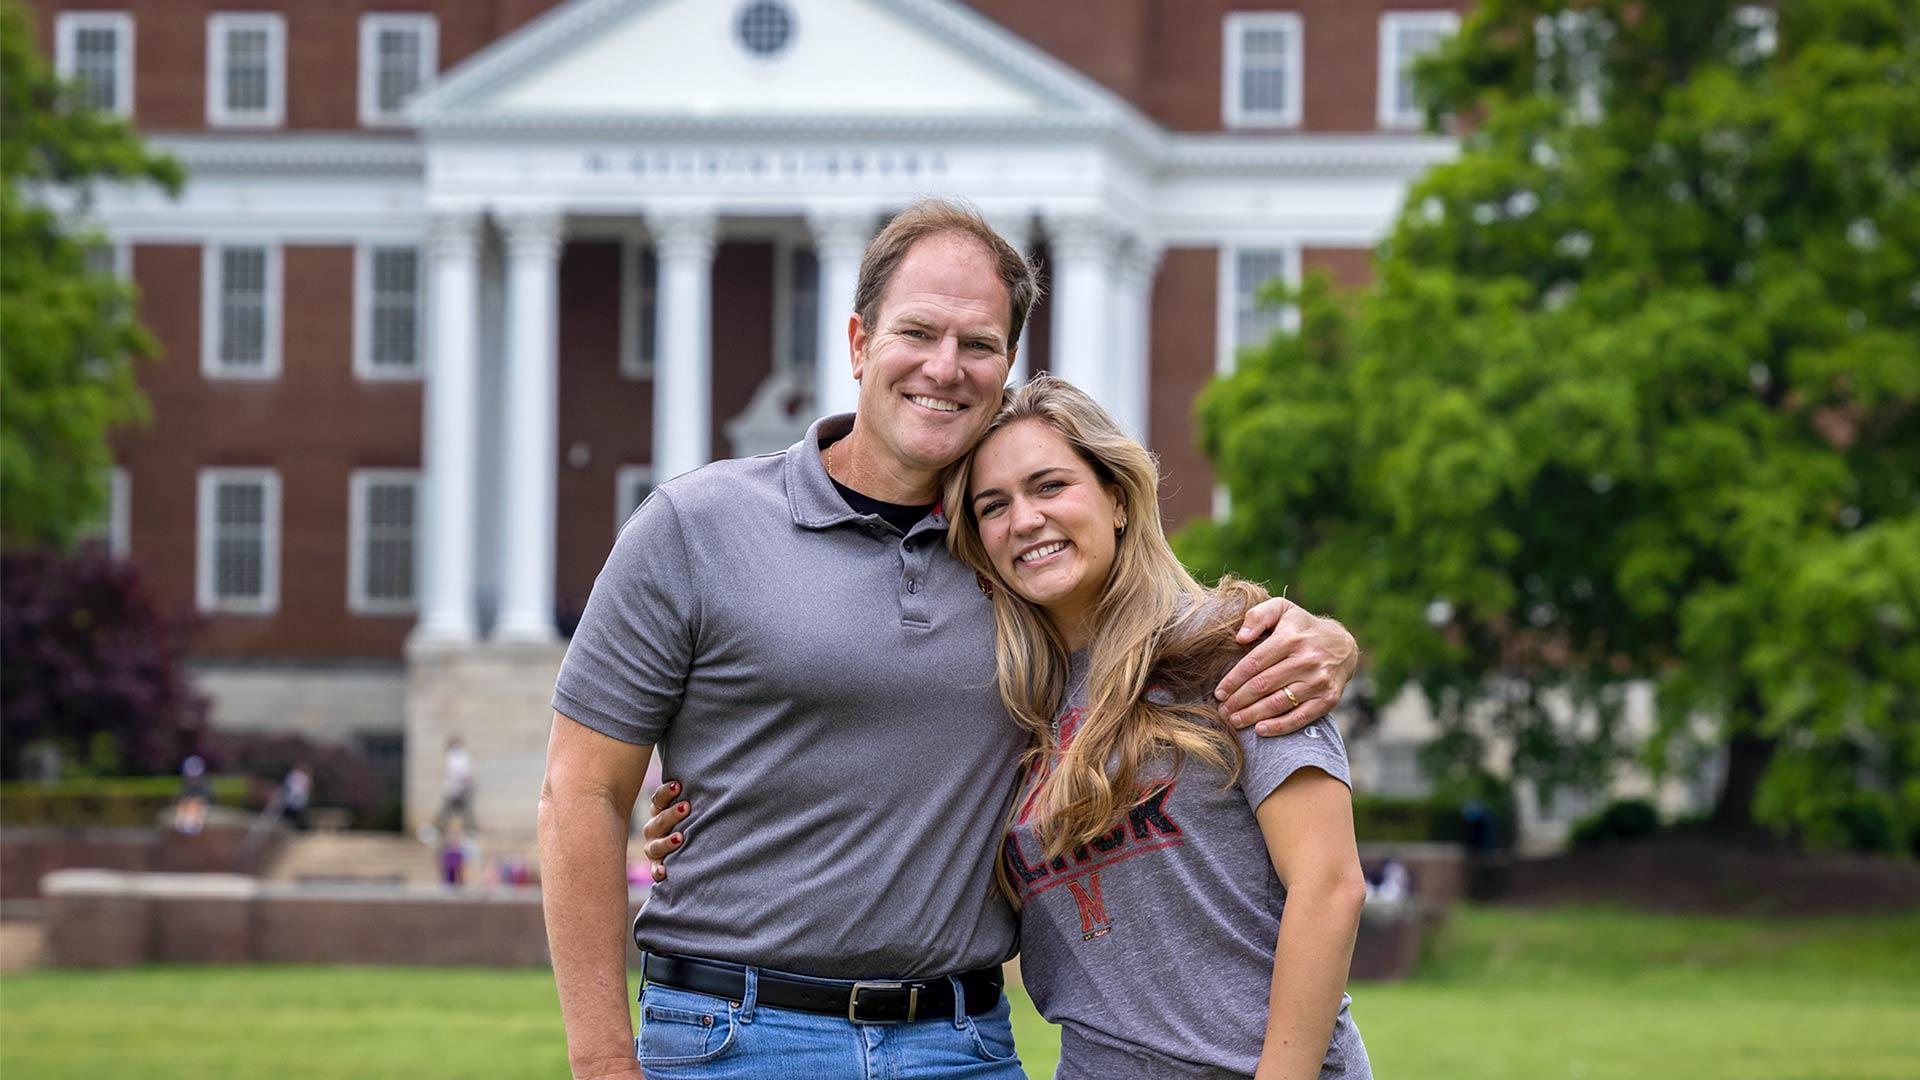 With her graduation this week, Kelly Kolanowski, shown with her dad, Paul '94, will become the fifth generation of Terp alums from her family. Photo by Stephanie S. Cordle.